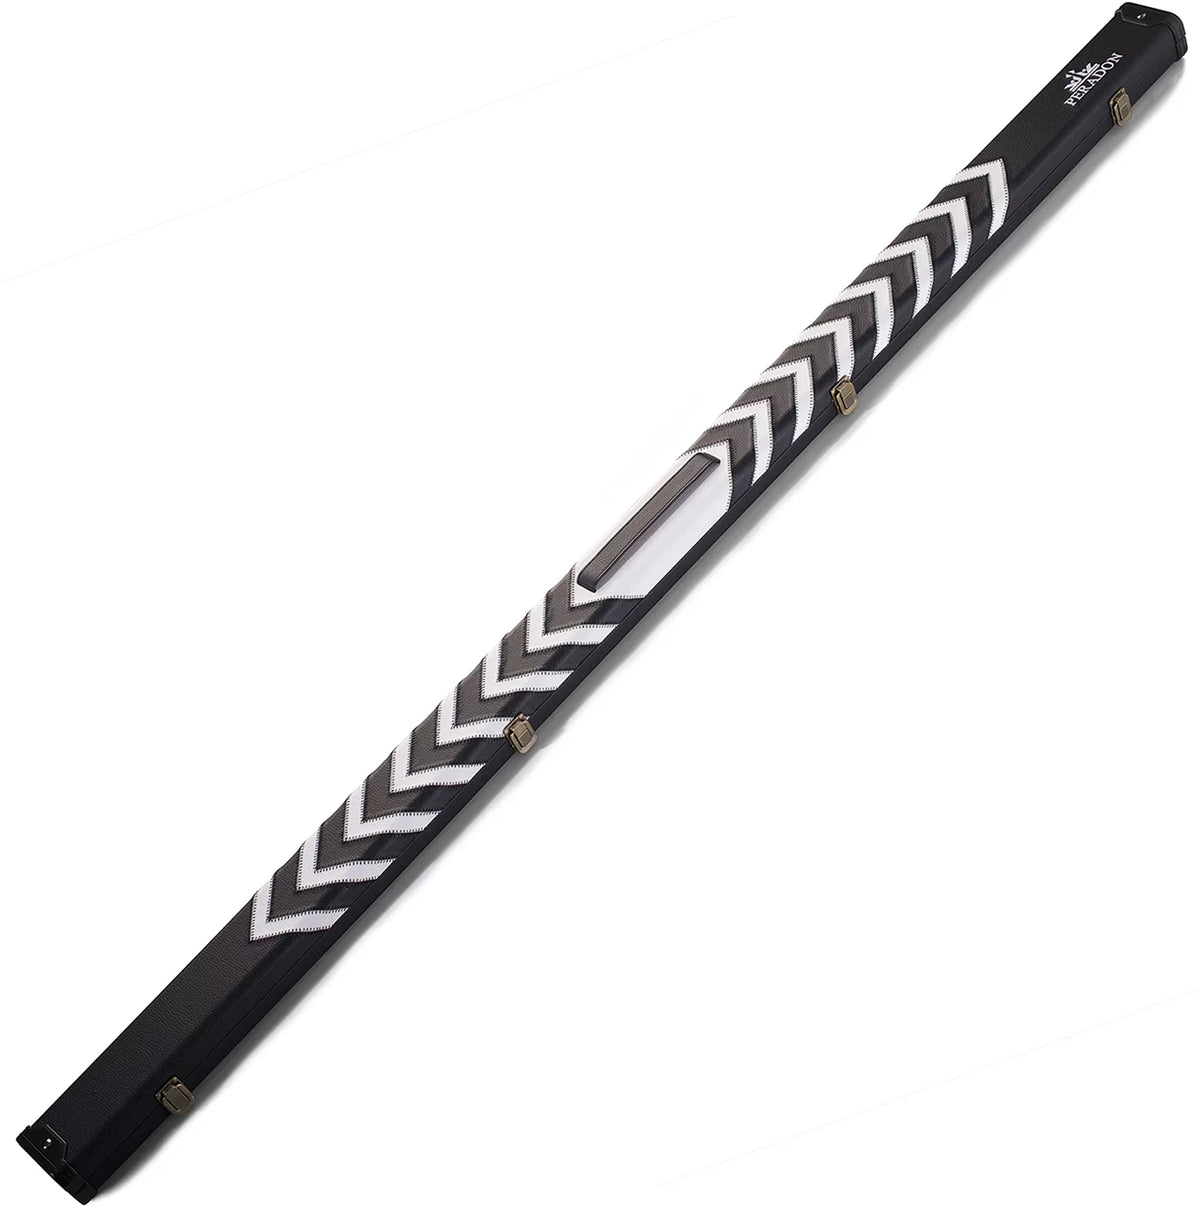 Peradon Black and White Clubman One Piece Cue Case. Full lengh view